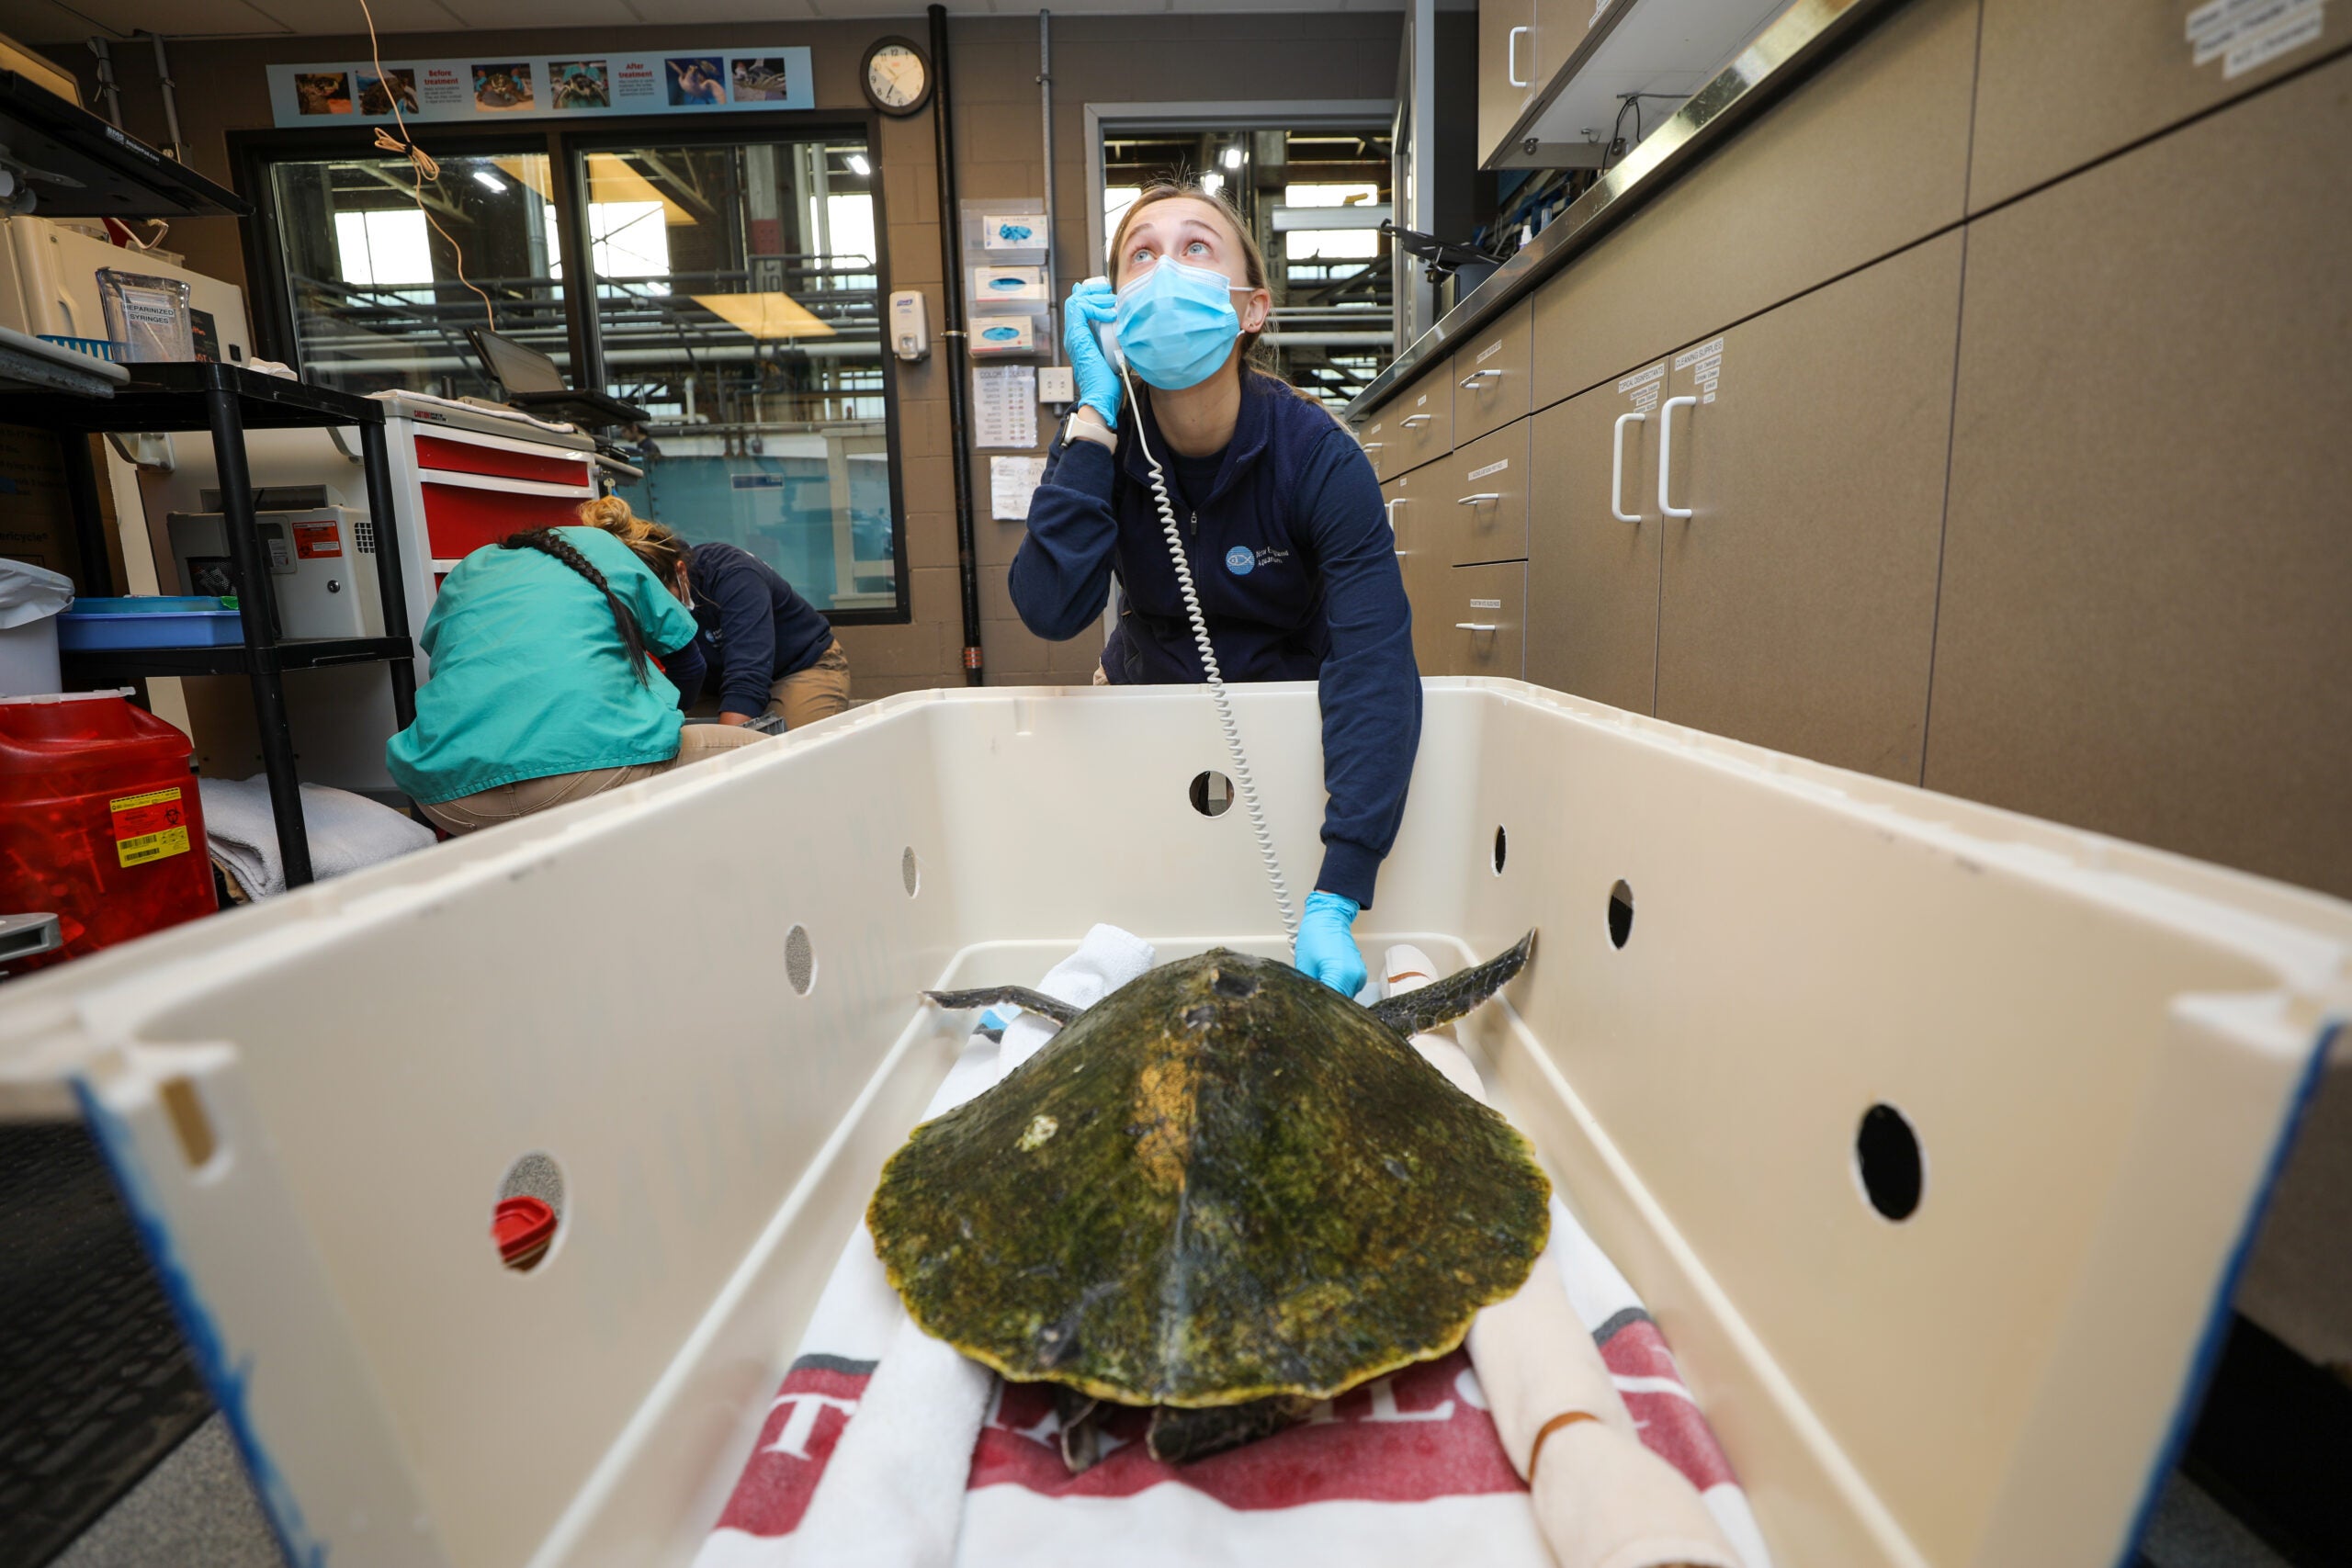 Over 150 sea turtles with hypothermia treated by New England Aquarium